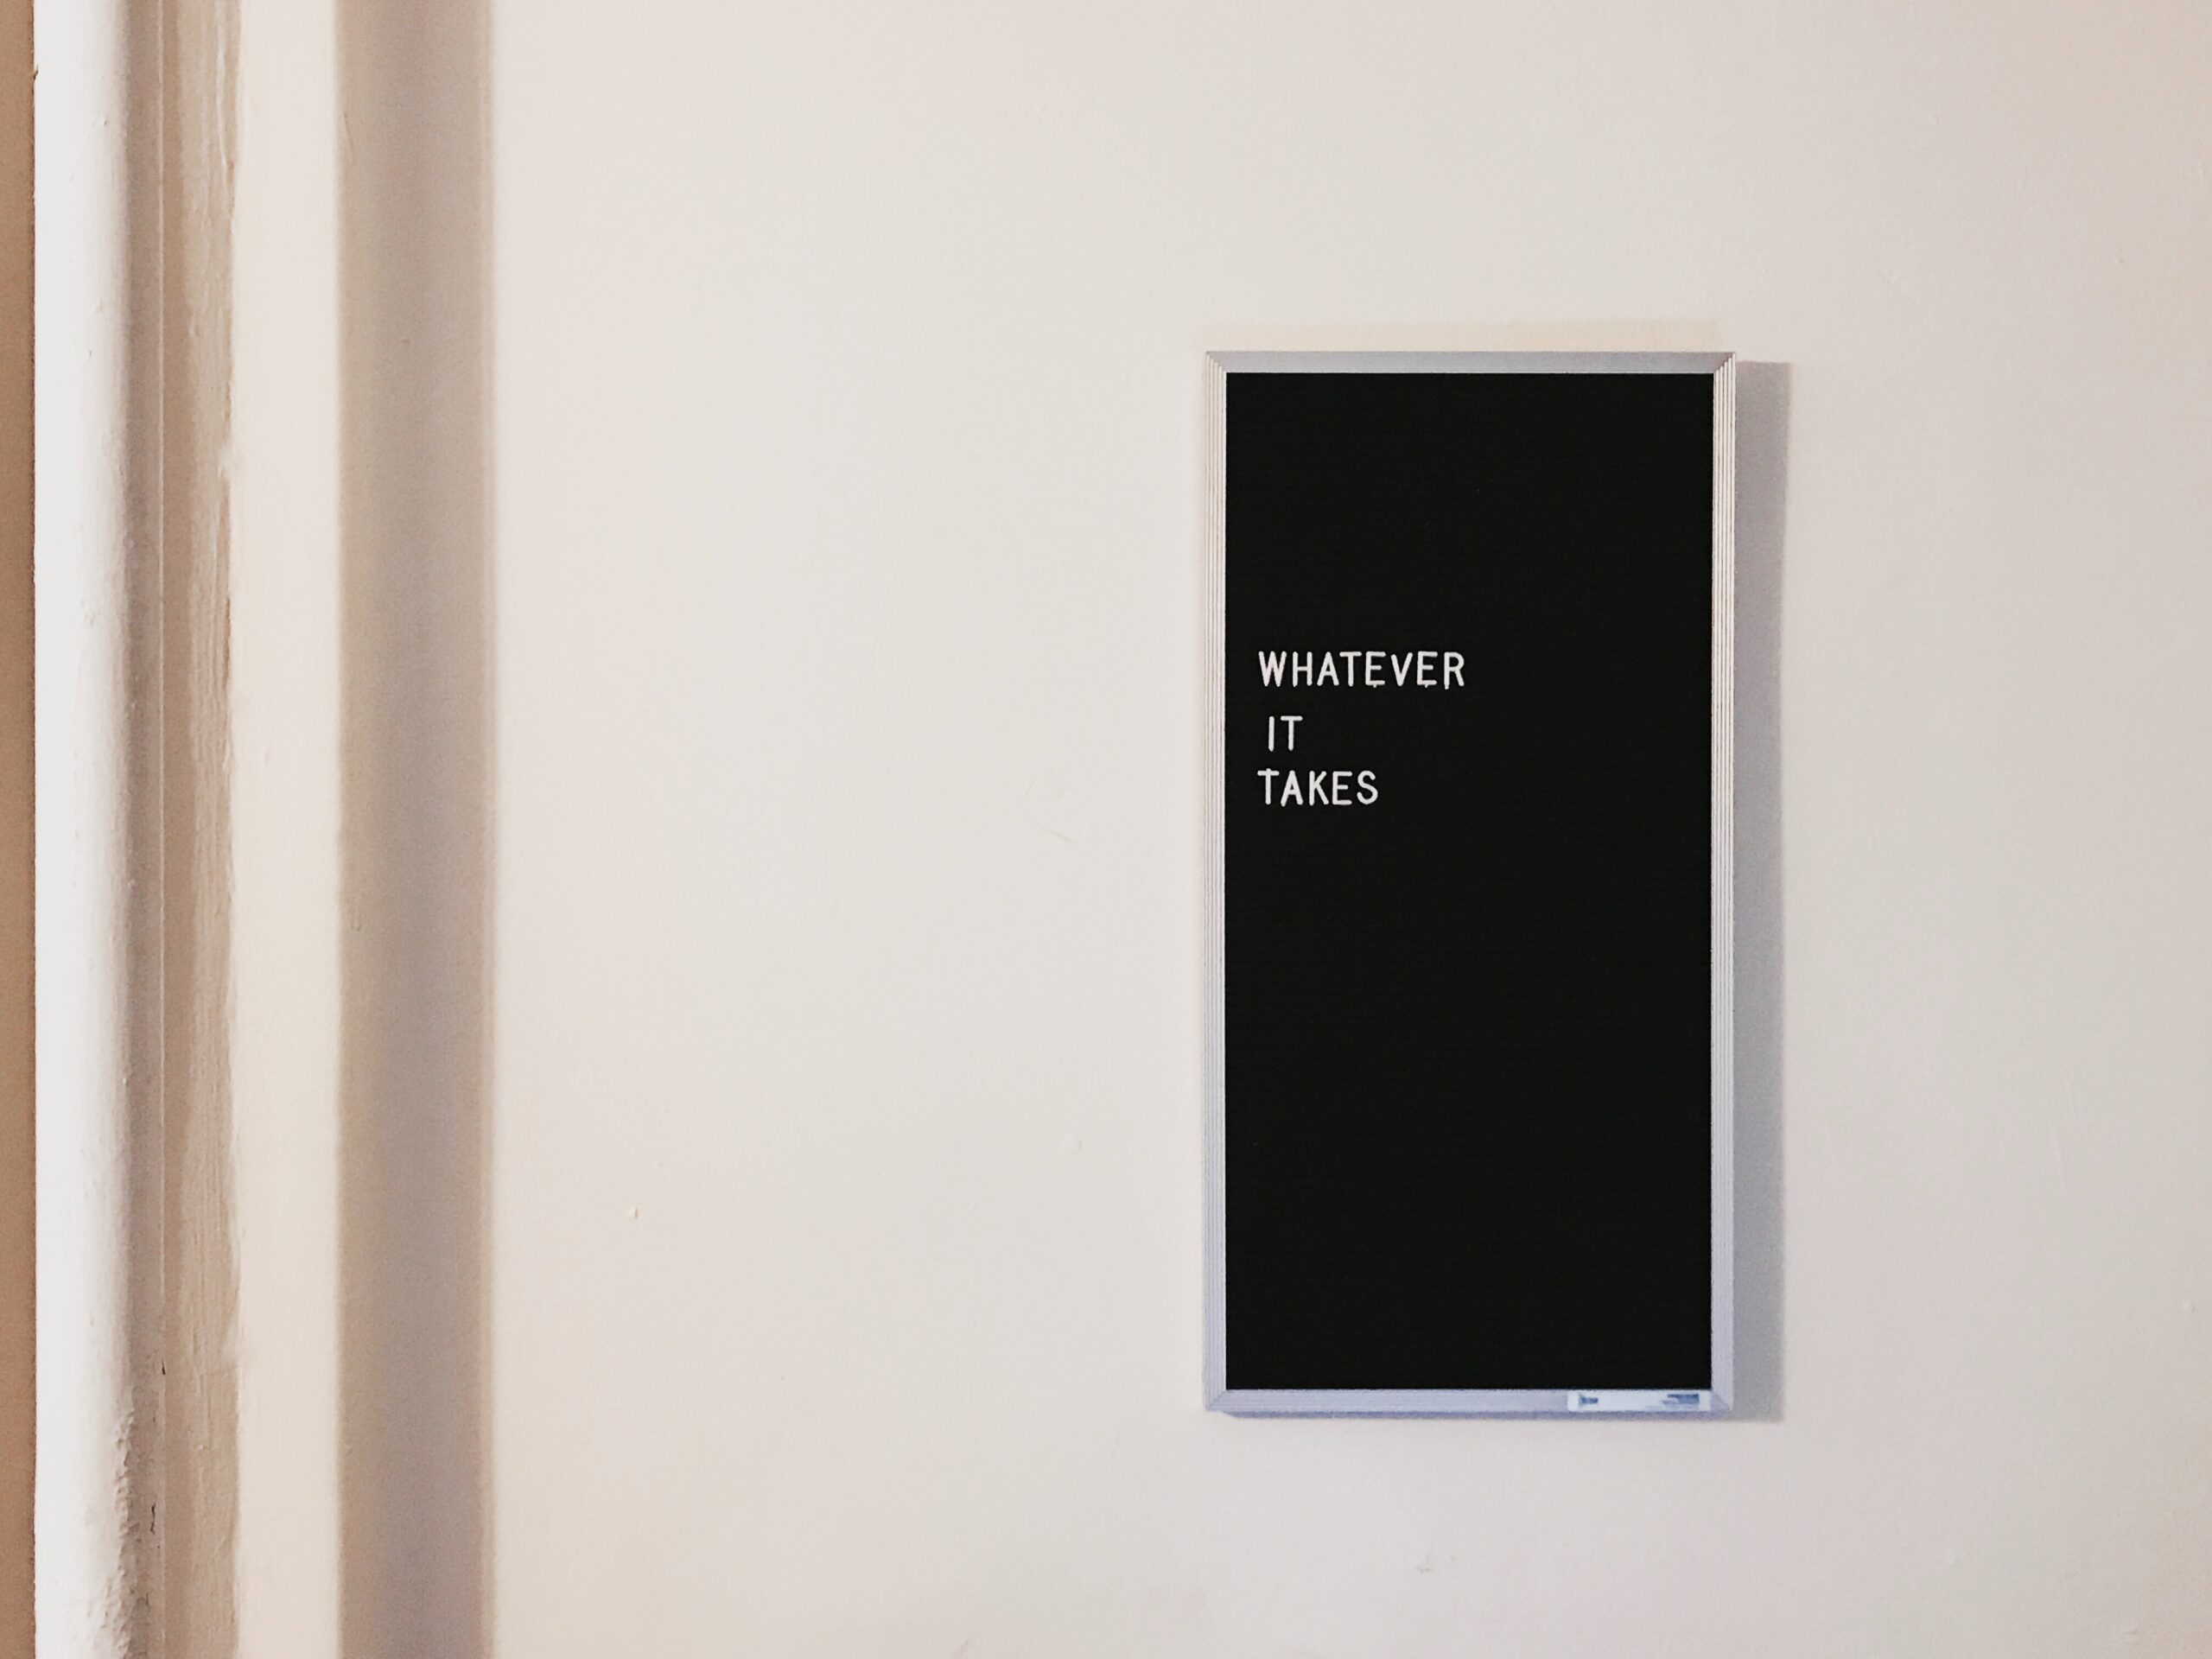 a blackboard on a wall with white lettering that says "whatever it takes"